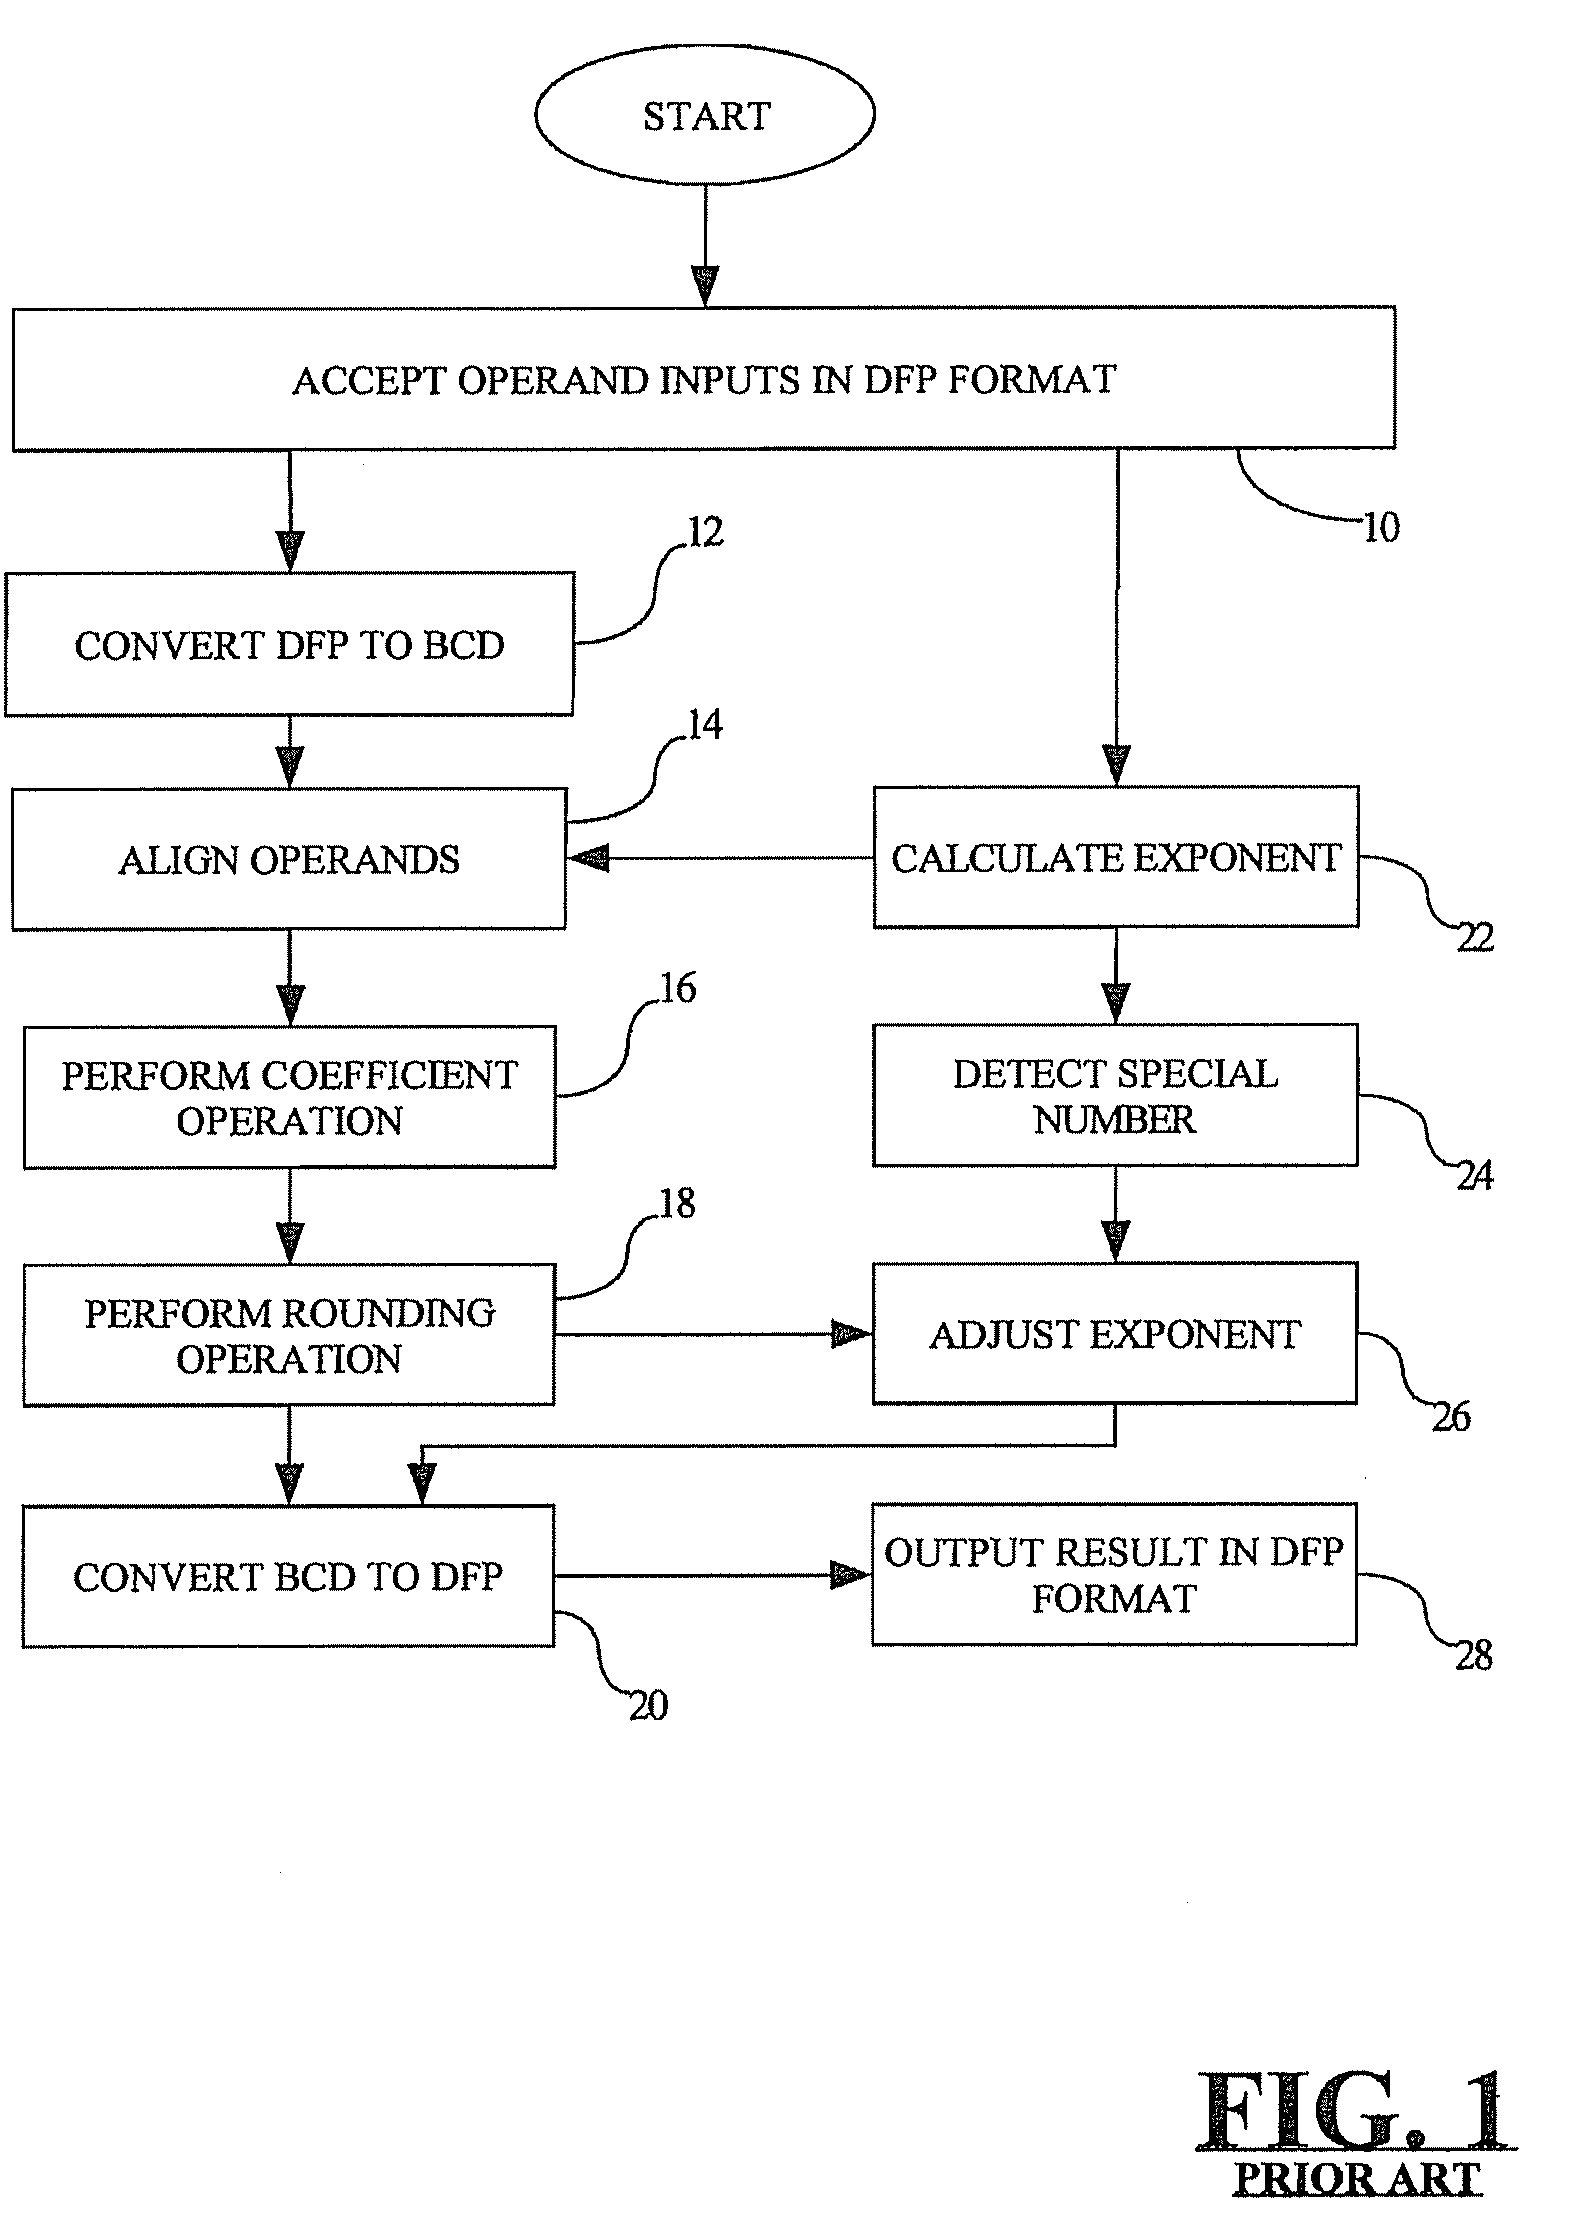 Execution of fixed point instructions using a decimal floating point unit